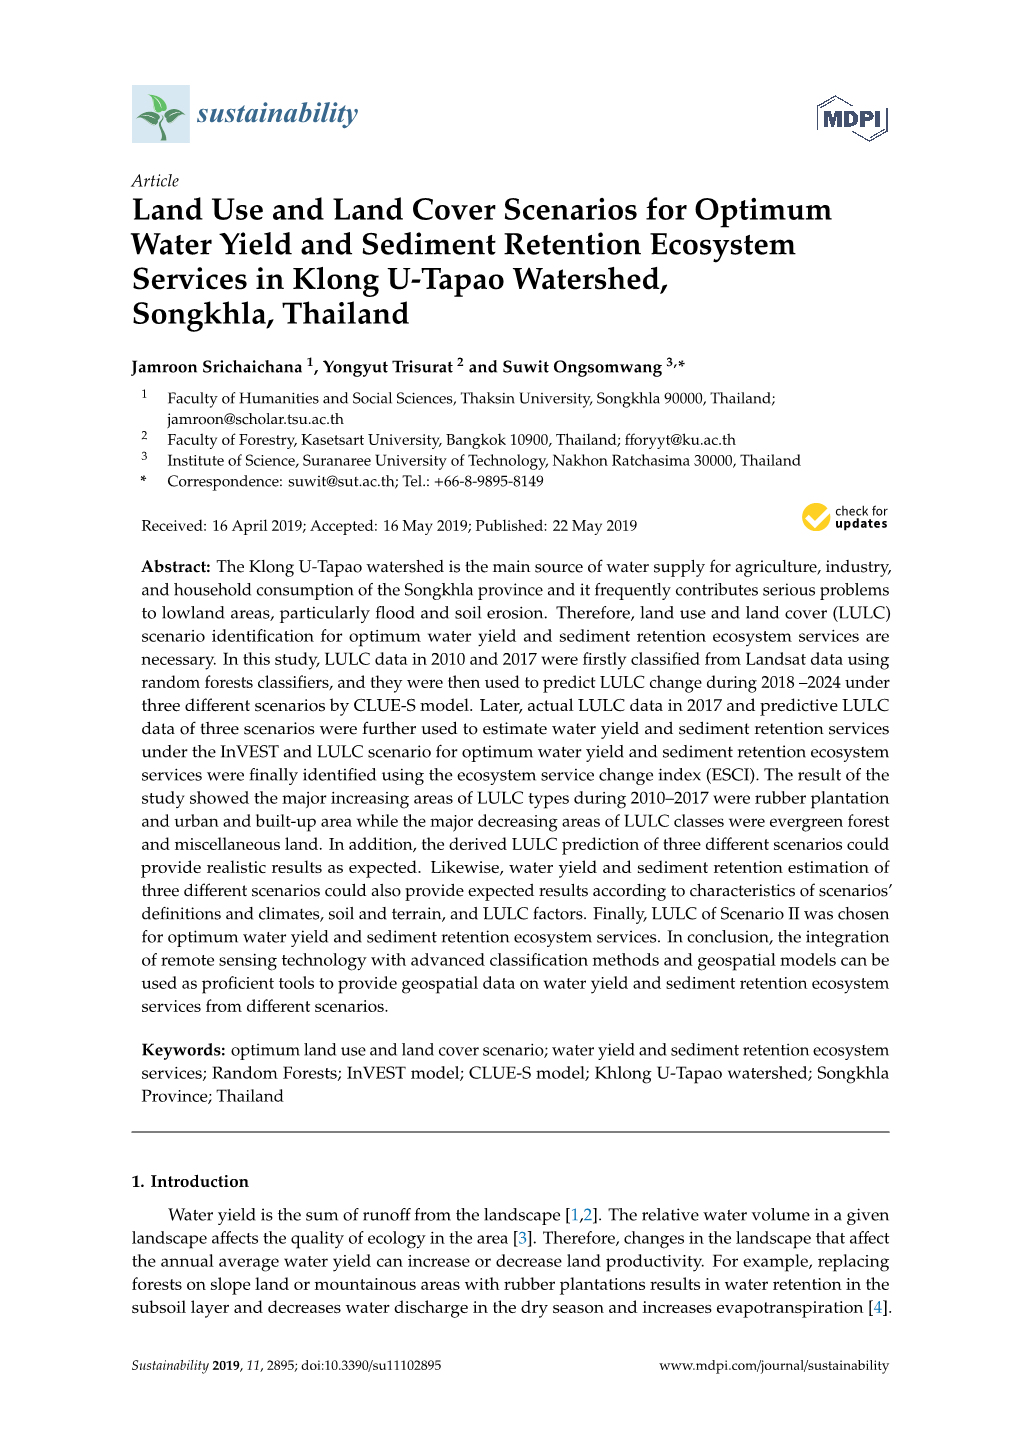 Land Use and Land Cover Scenarios for Optimum Water Yield and Sediment Retention Ecosystem Services in Klong U-Tapao Watershed, Songkhla, Thailand